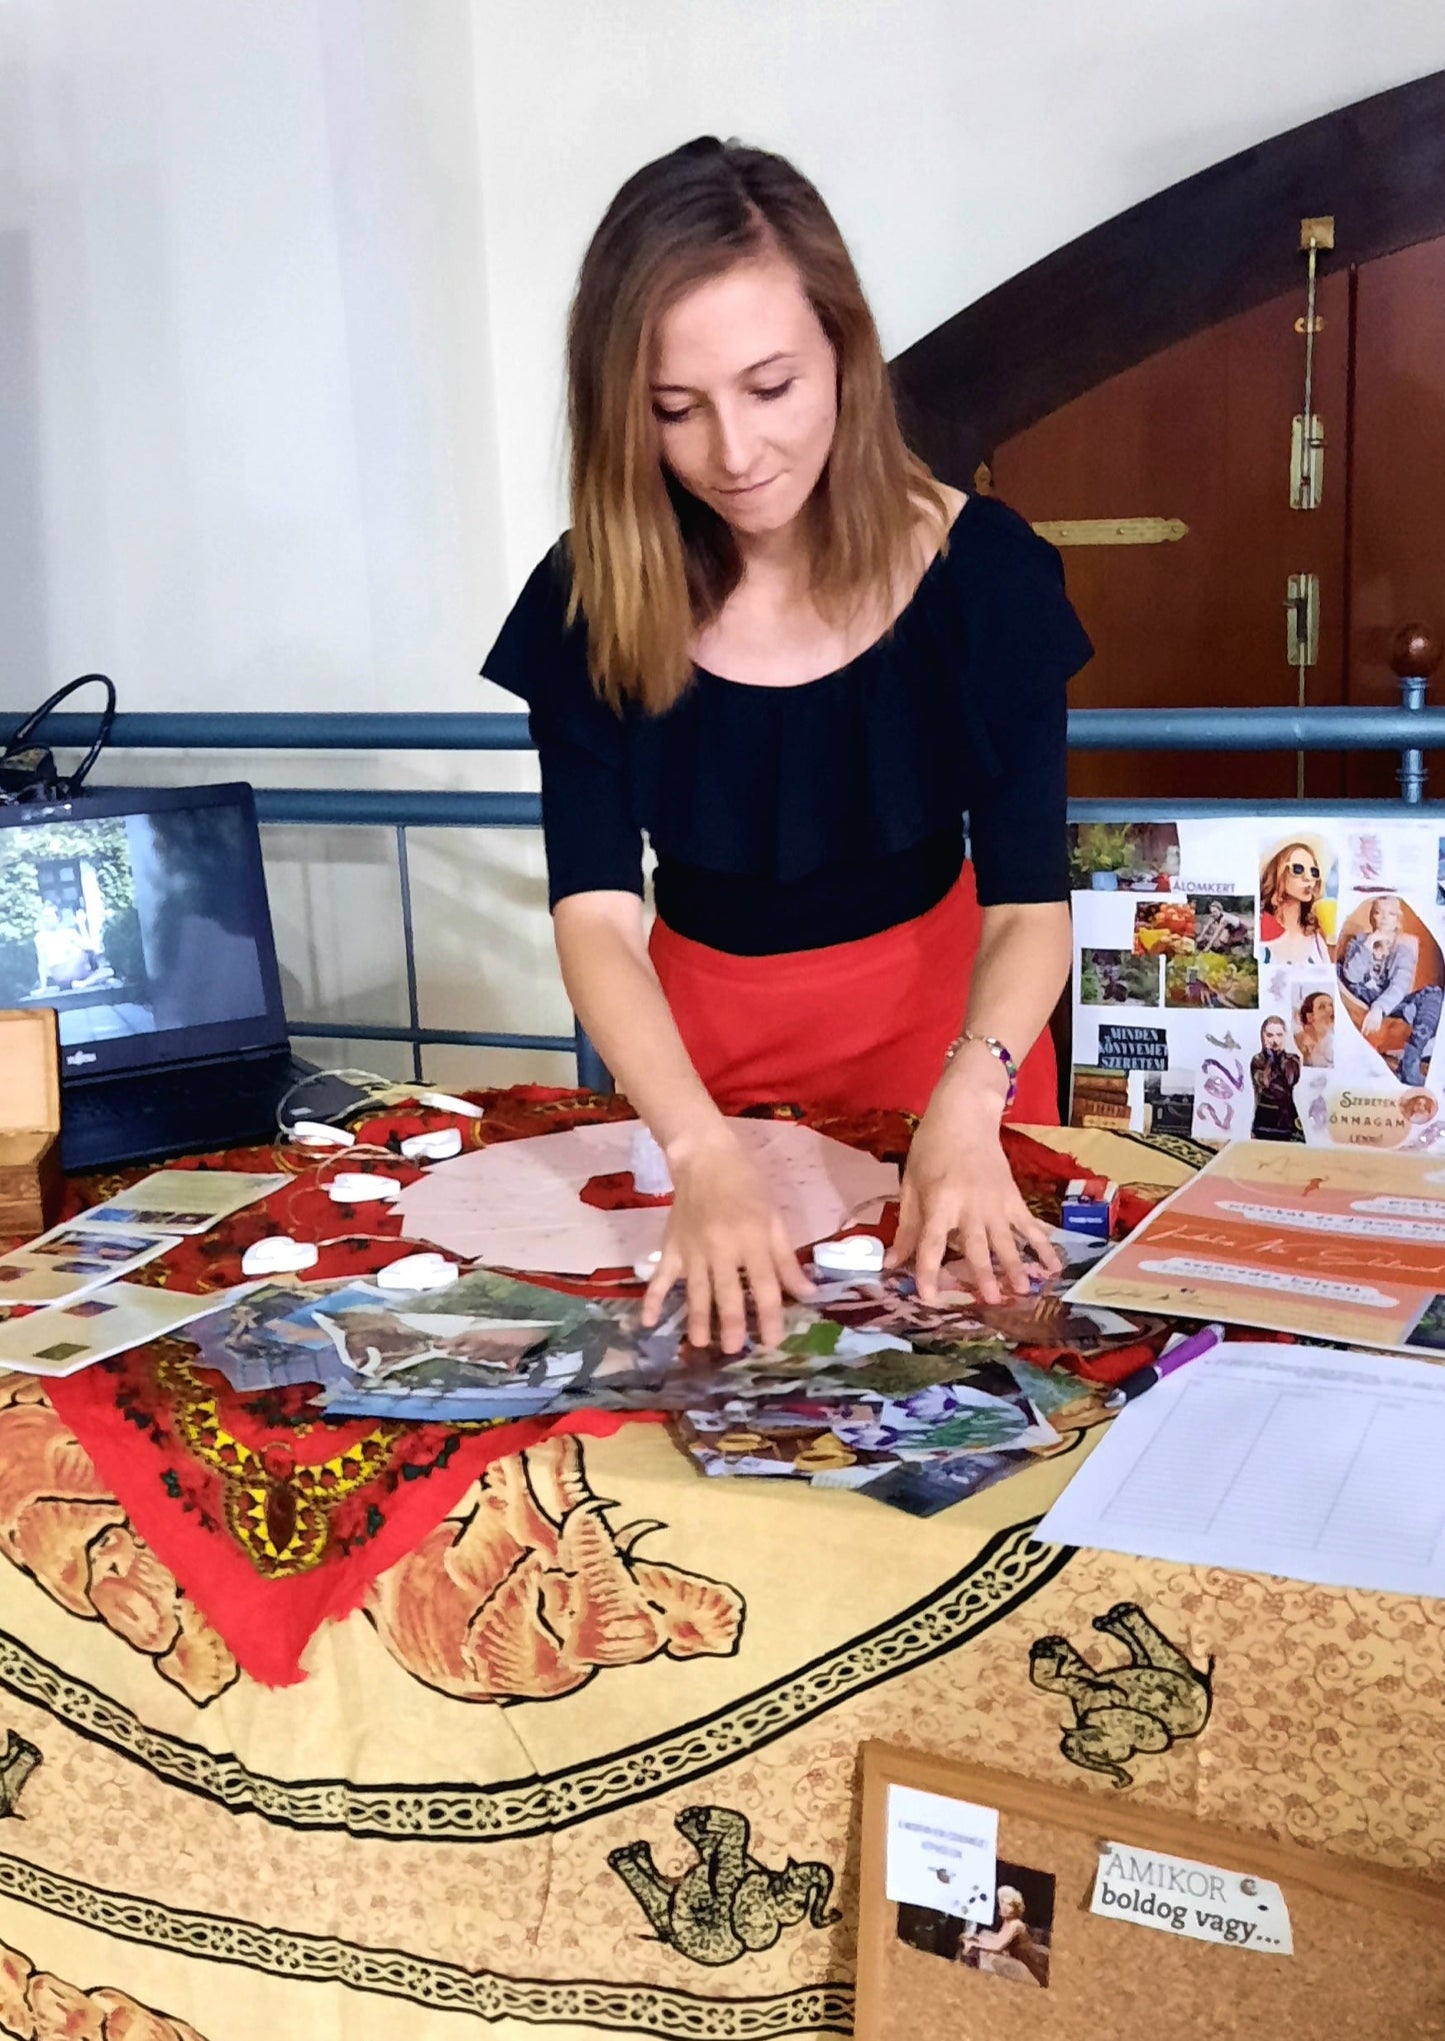 Creativity Workshop "Create Your Vision Board And Make Your Dream Life Tangible" with Marianna in Debrecen, Hungary by subcultours